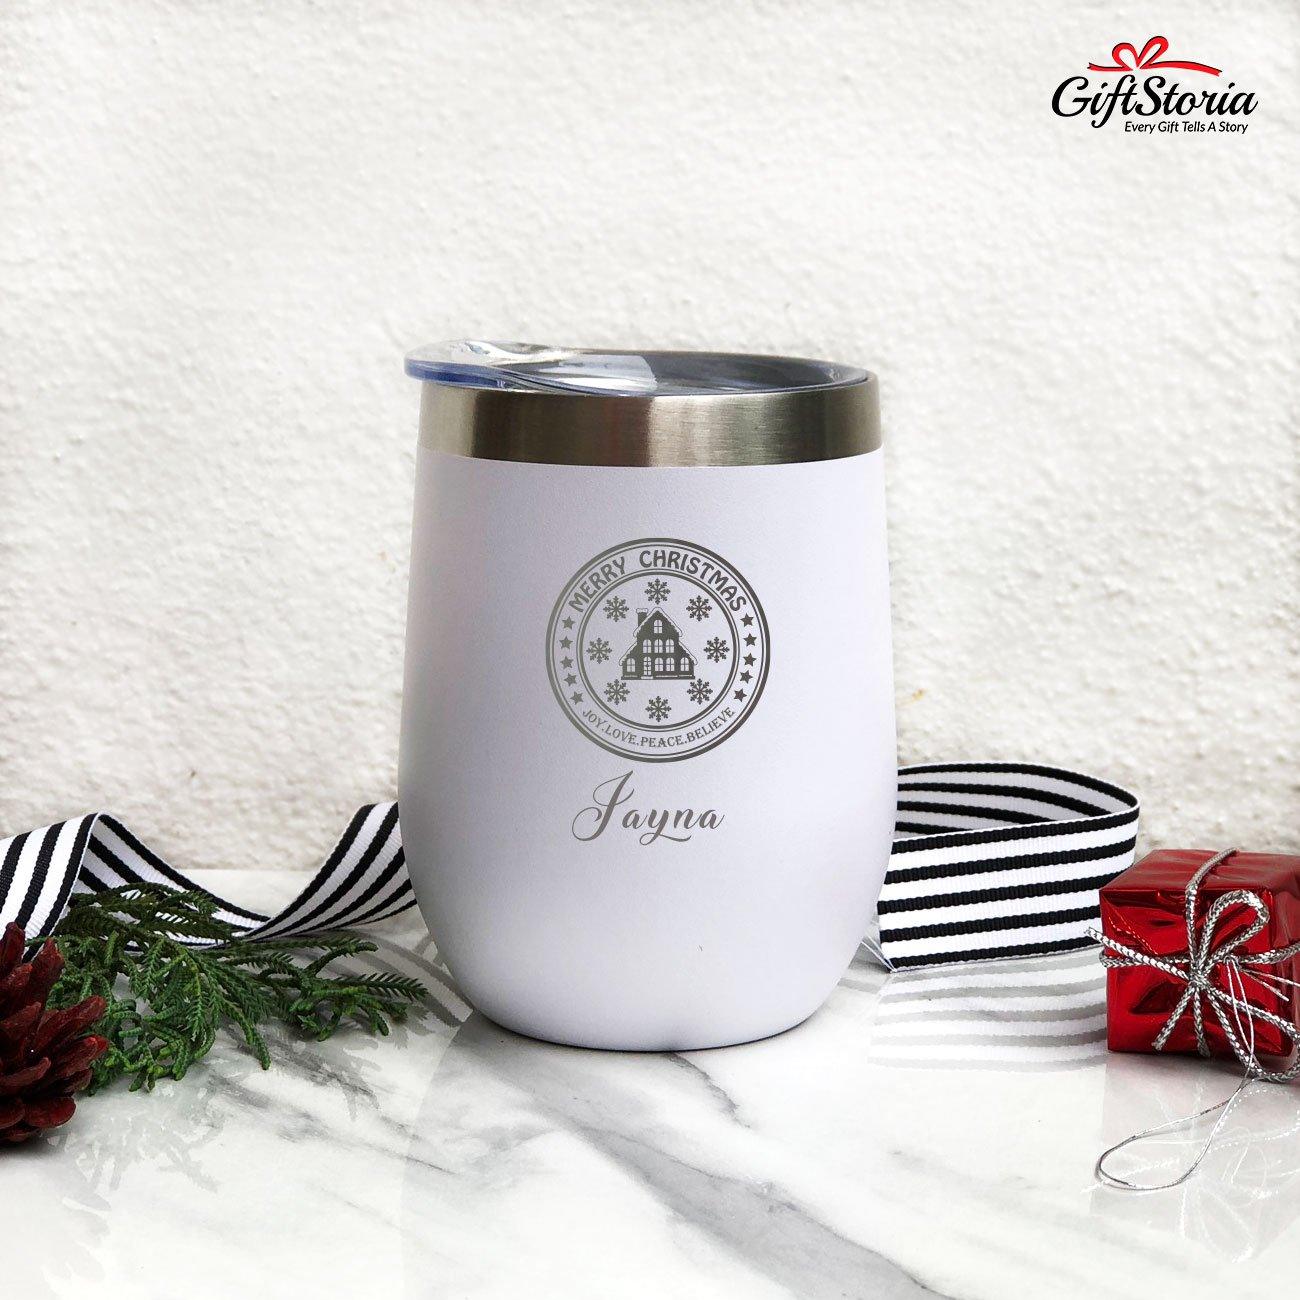 Personalized Christmas Tumbler - "Snowhouse" - GiftStoria.com